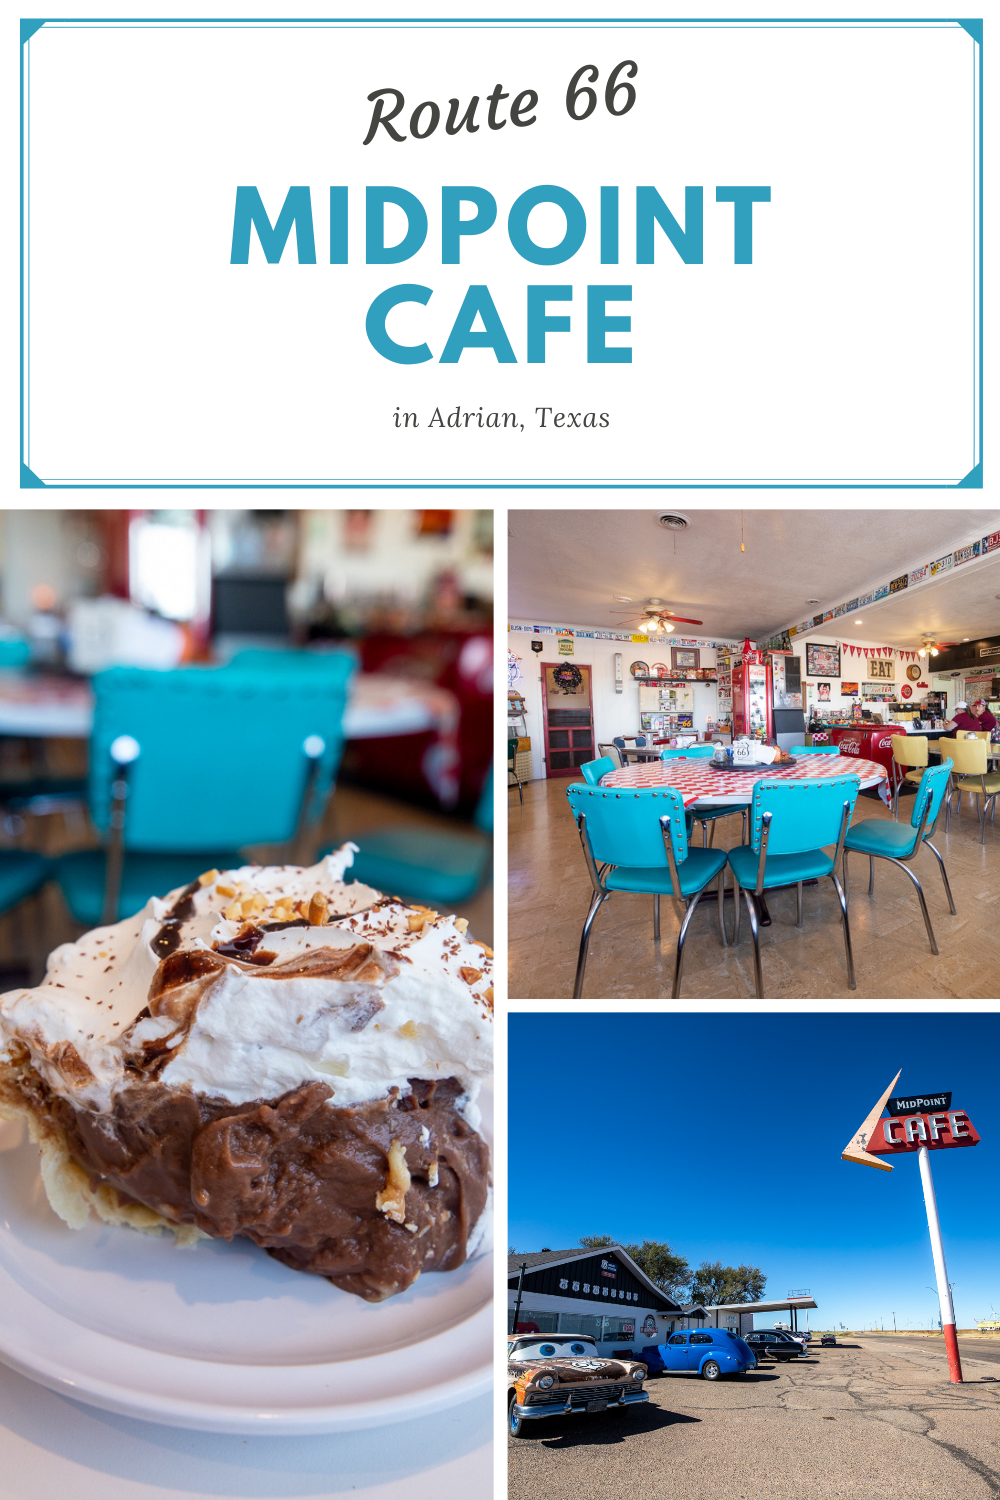 When you're here, you're halfway there! And where is there? Chicago…or Los Angeles…depending on which direction you are driving. The Midpoint Cafe in Adrian, Texas is located at the midpoint of Route 66 and is a must stop on your road trip along the Mother Road.  #RoadTrips #RoadTripStop #Route66 #Route66RoadTrip #TexasRoute66 #Texas #TexasRoadTrip #TexasRoadsideAttractions #RoadsideAttractions #RoadsideAttraction #RoadsideAmerica #RoadTrip 